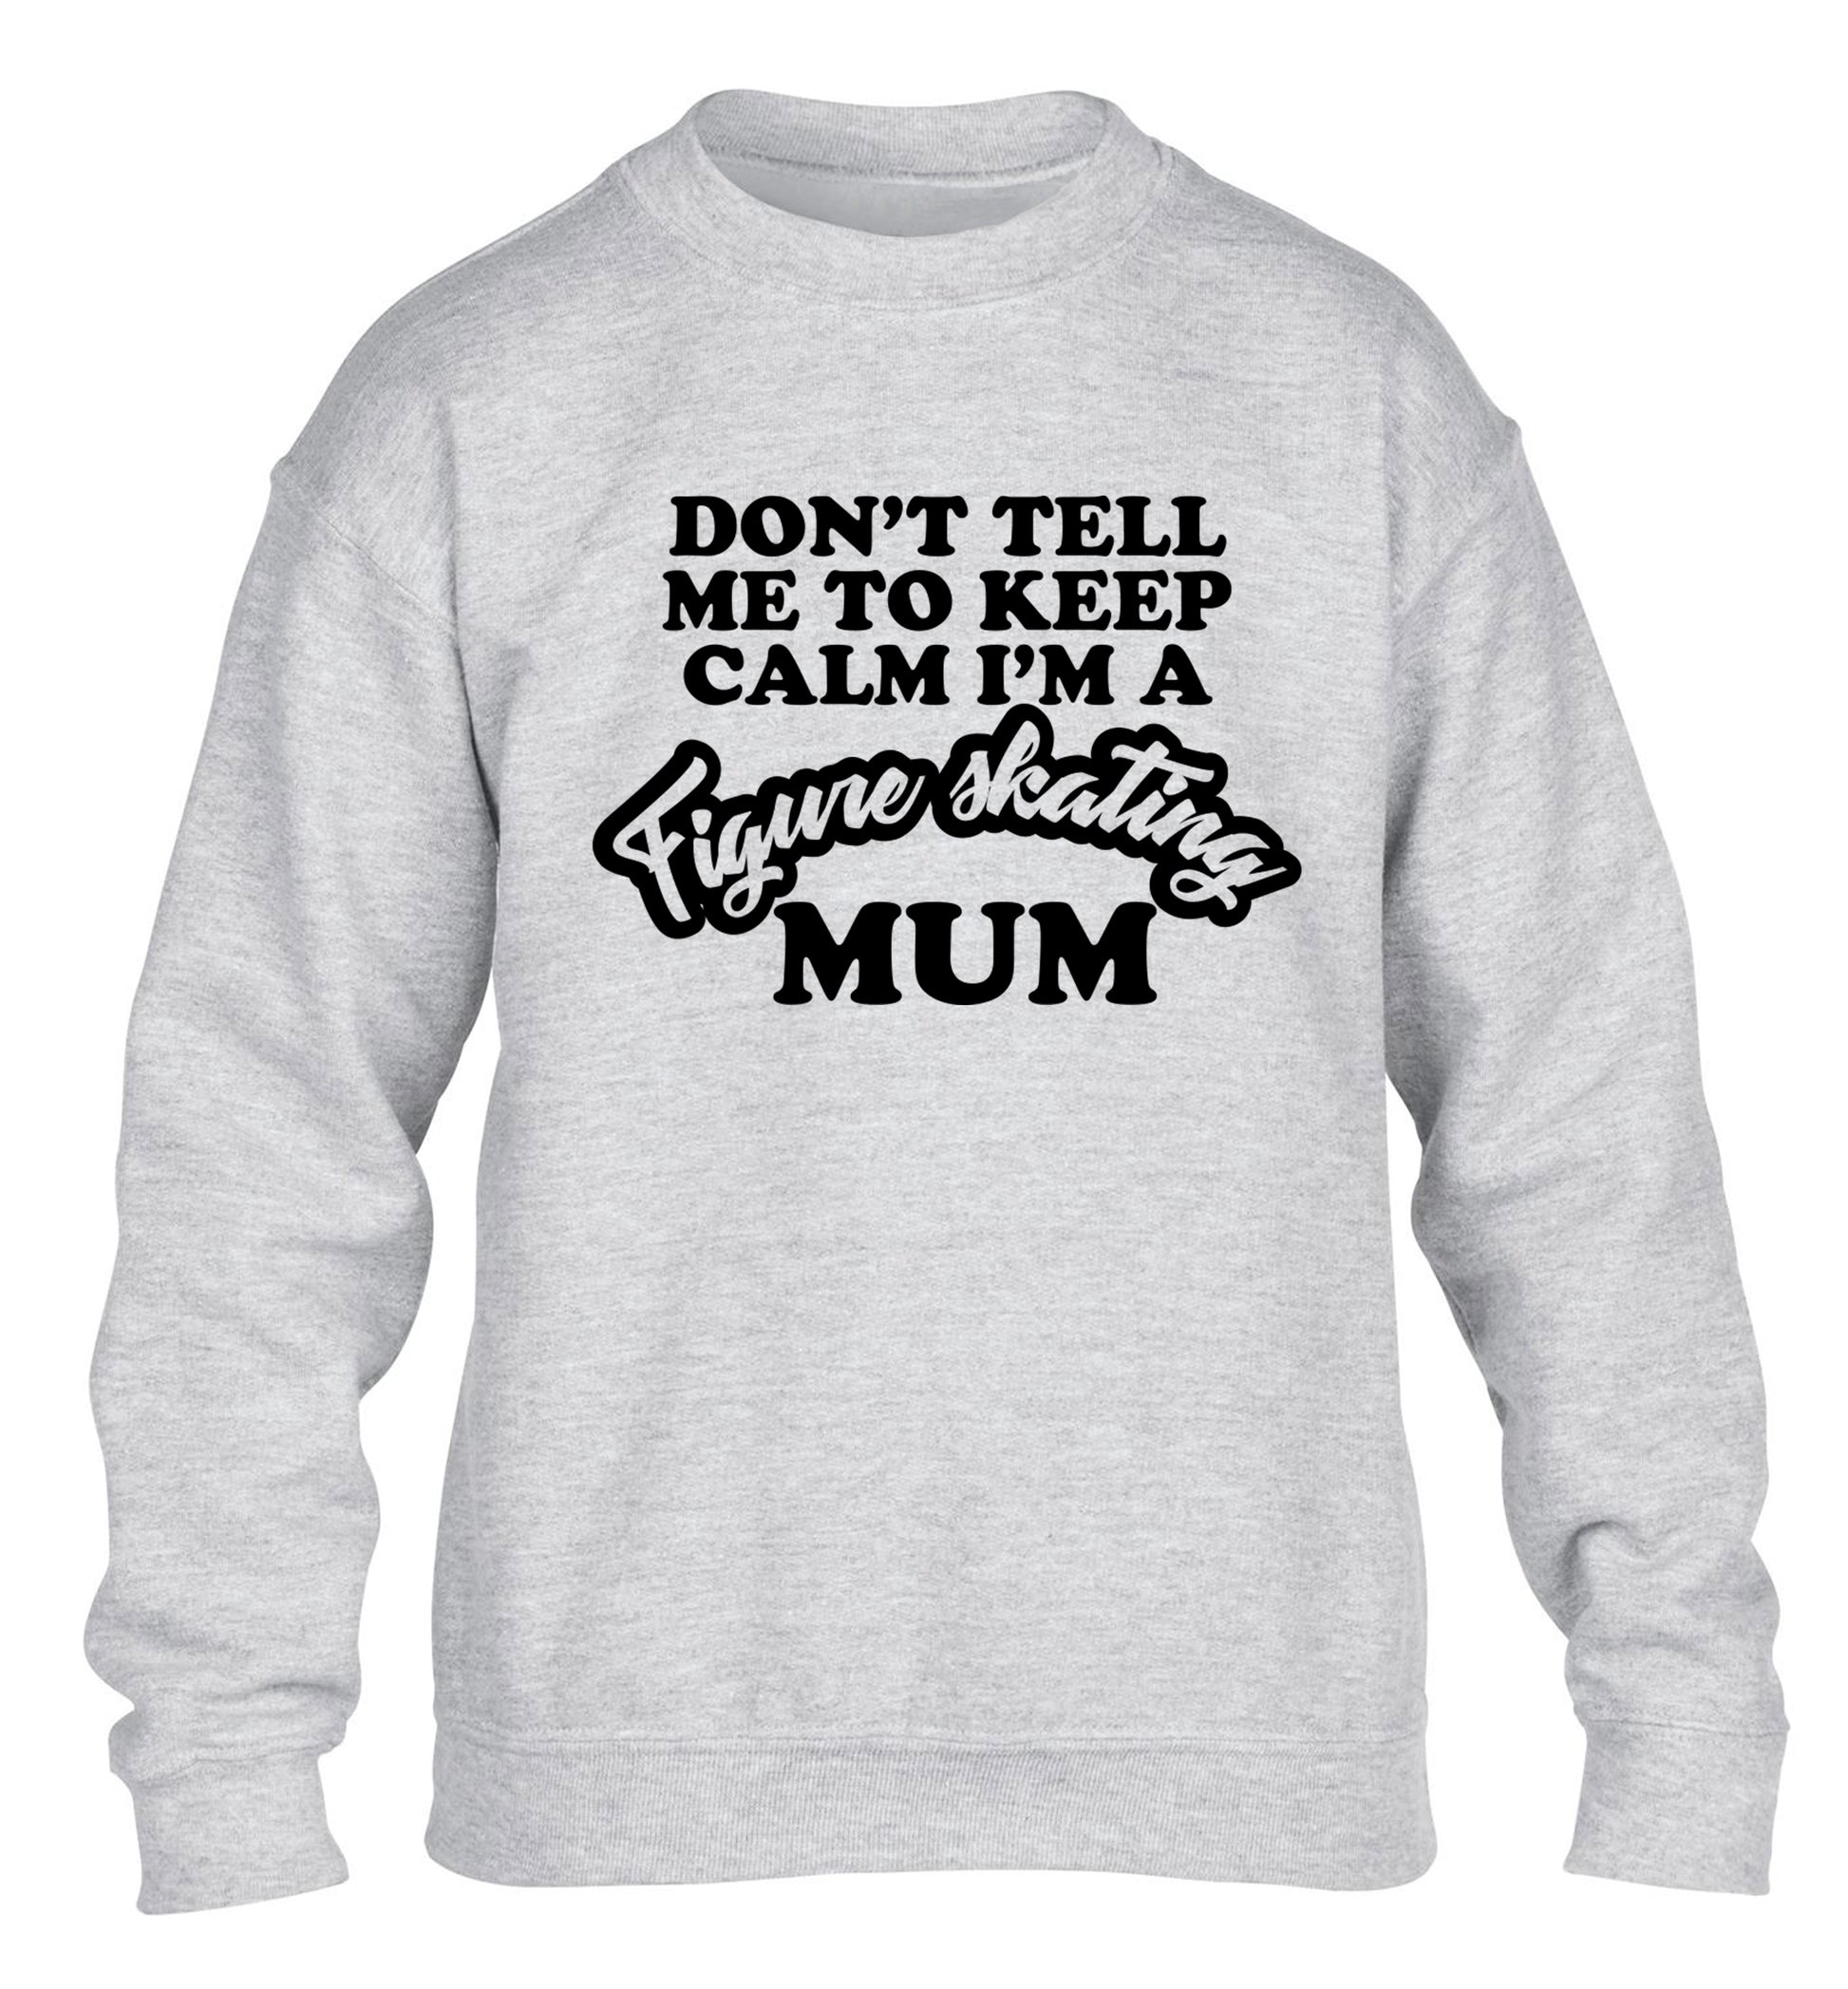 Don't tell me to keep calm I'm a figure skating mum children's grey sweater 12-14 Years